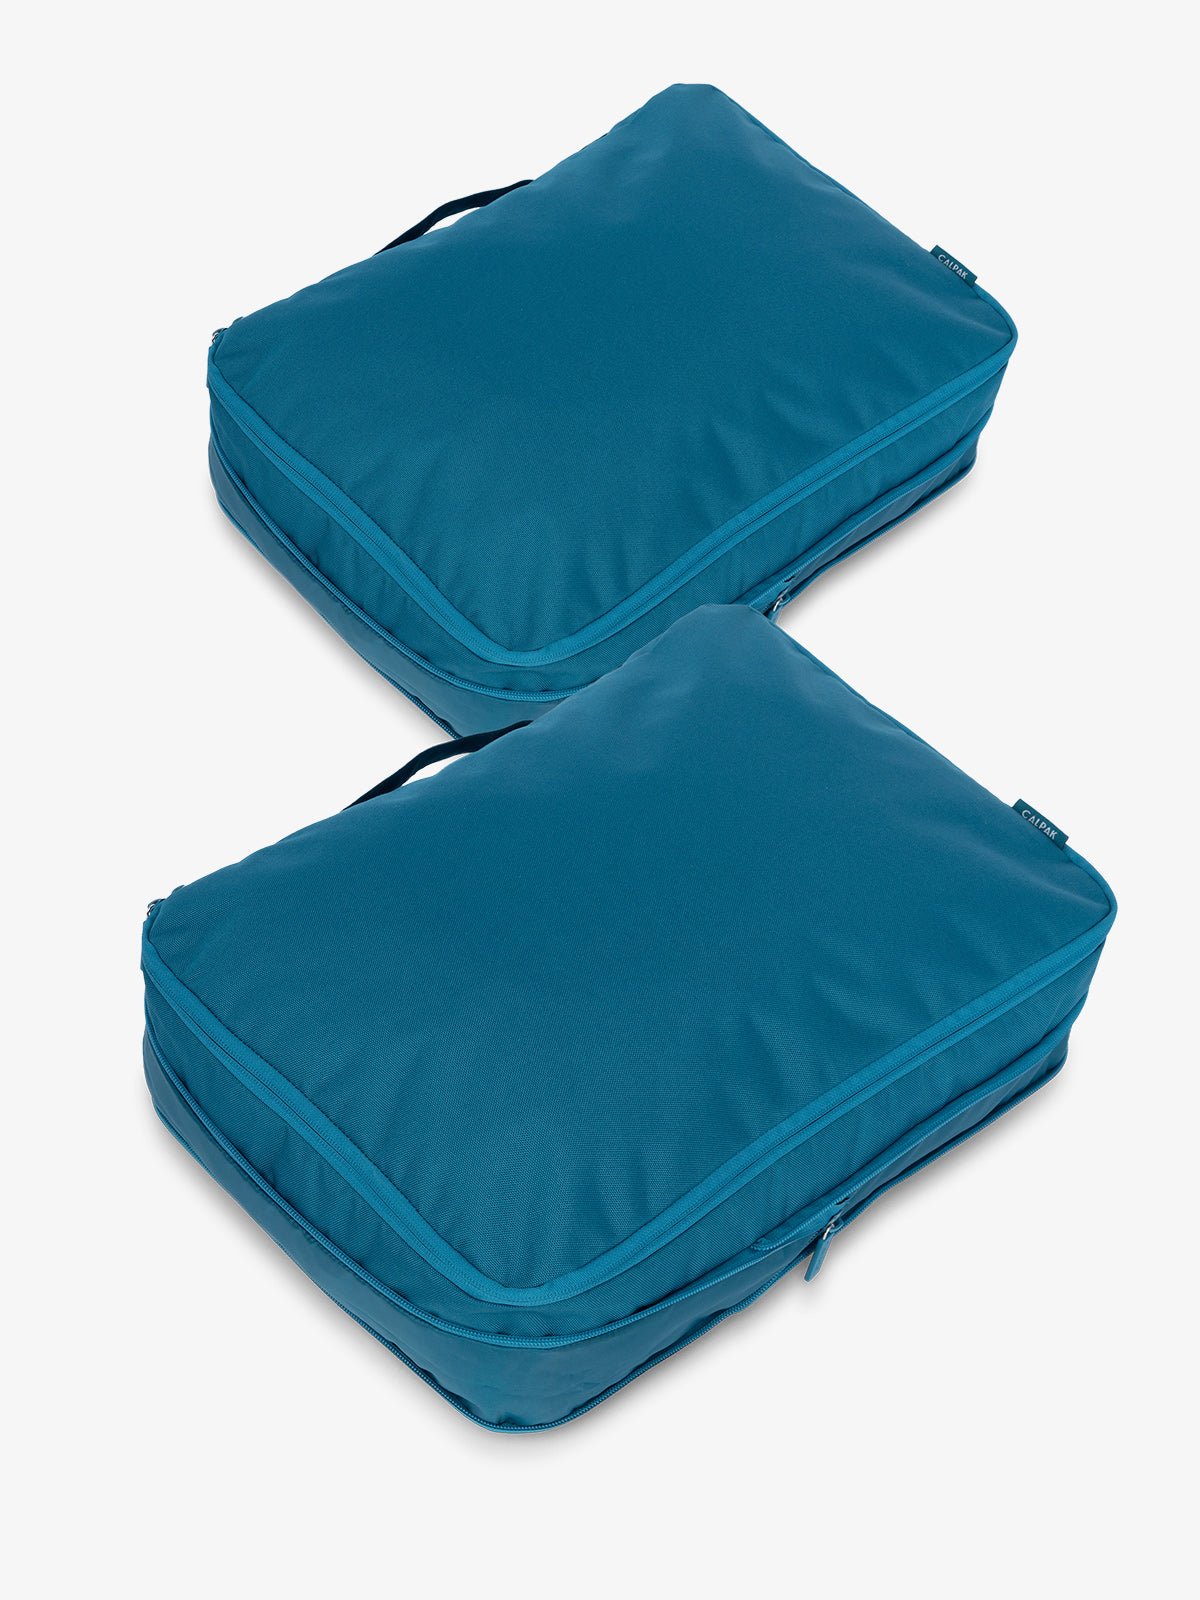 CALPAK large packing cubes with top handles and expandable by 4.5 inches in lagoon blue